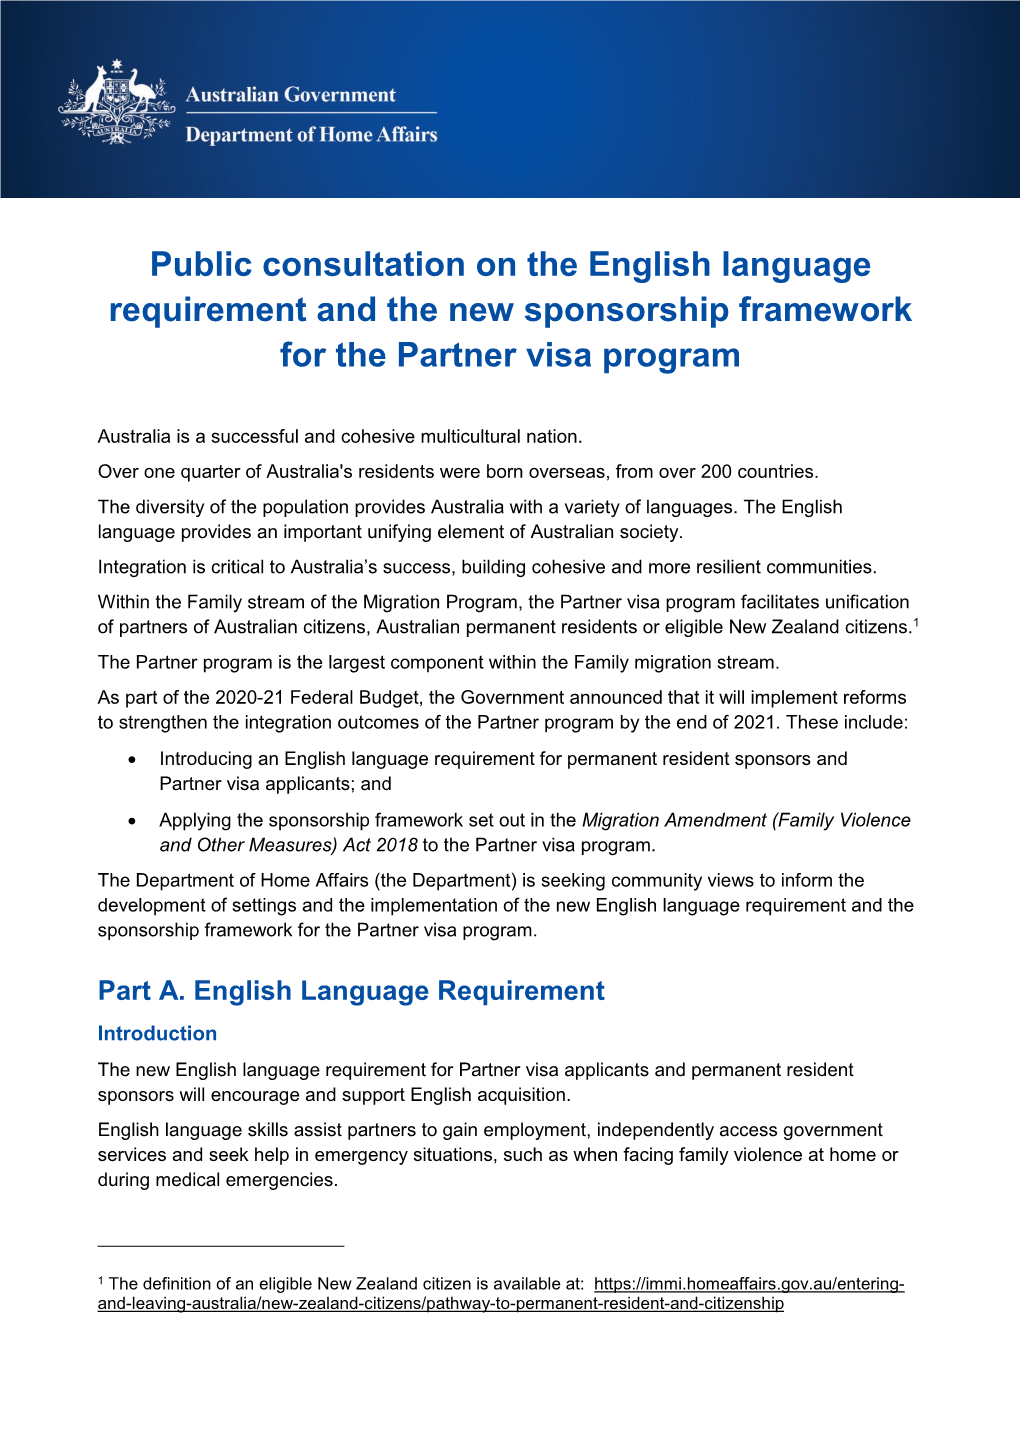 Public Consultation on the English Language Requirement and the New Sponsorship Framework for the Partner Visa Program